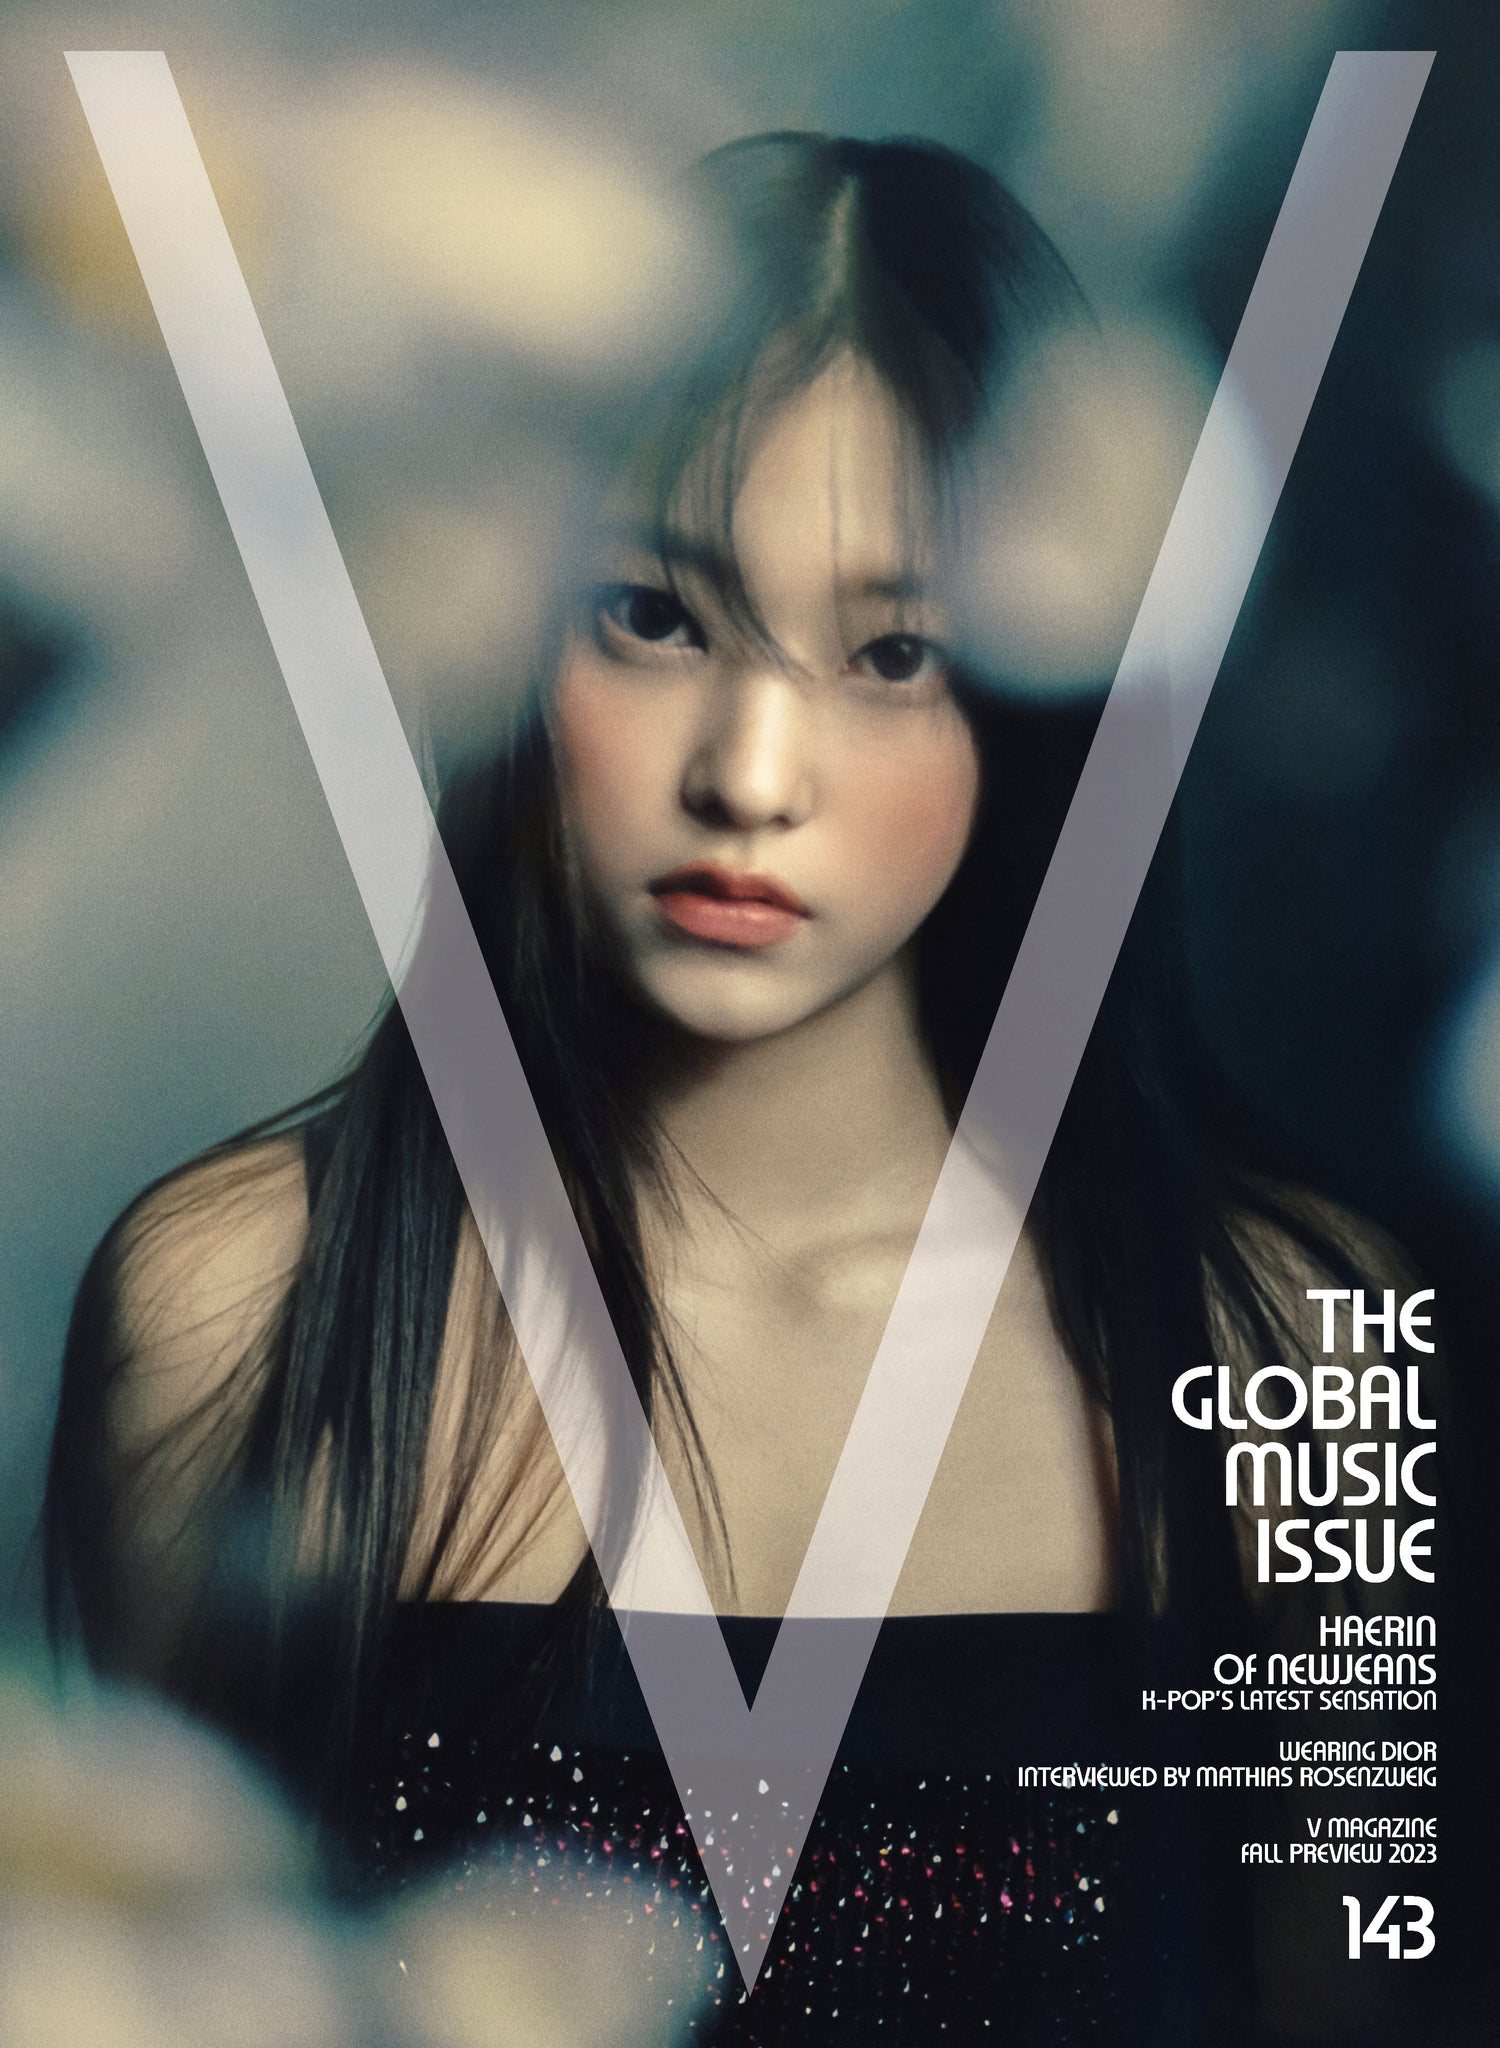 V143 "THE GLOBAL MUSIC ISSUE"